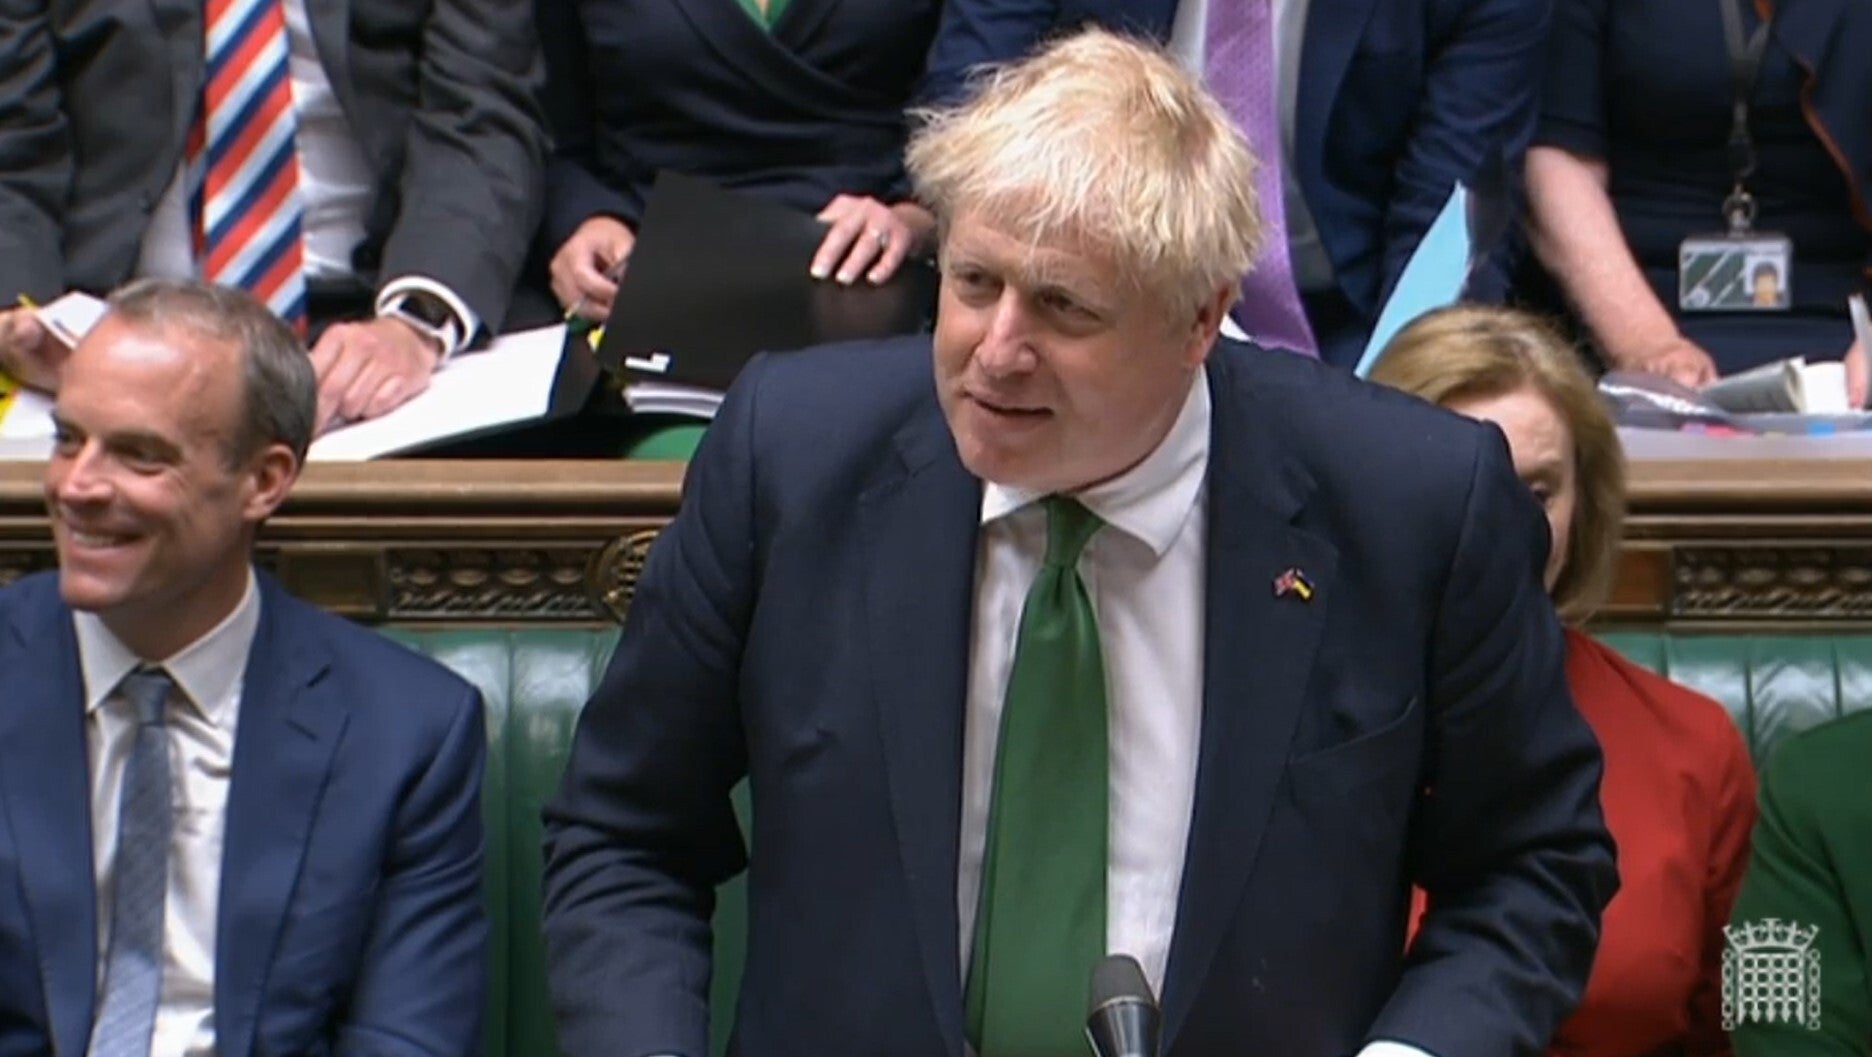 Prime Minister Boris Johnson speaks during Prime Minister’s Questions in the House of Commons (House of Commons/PA)